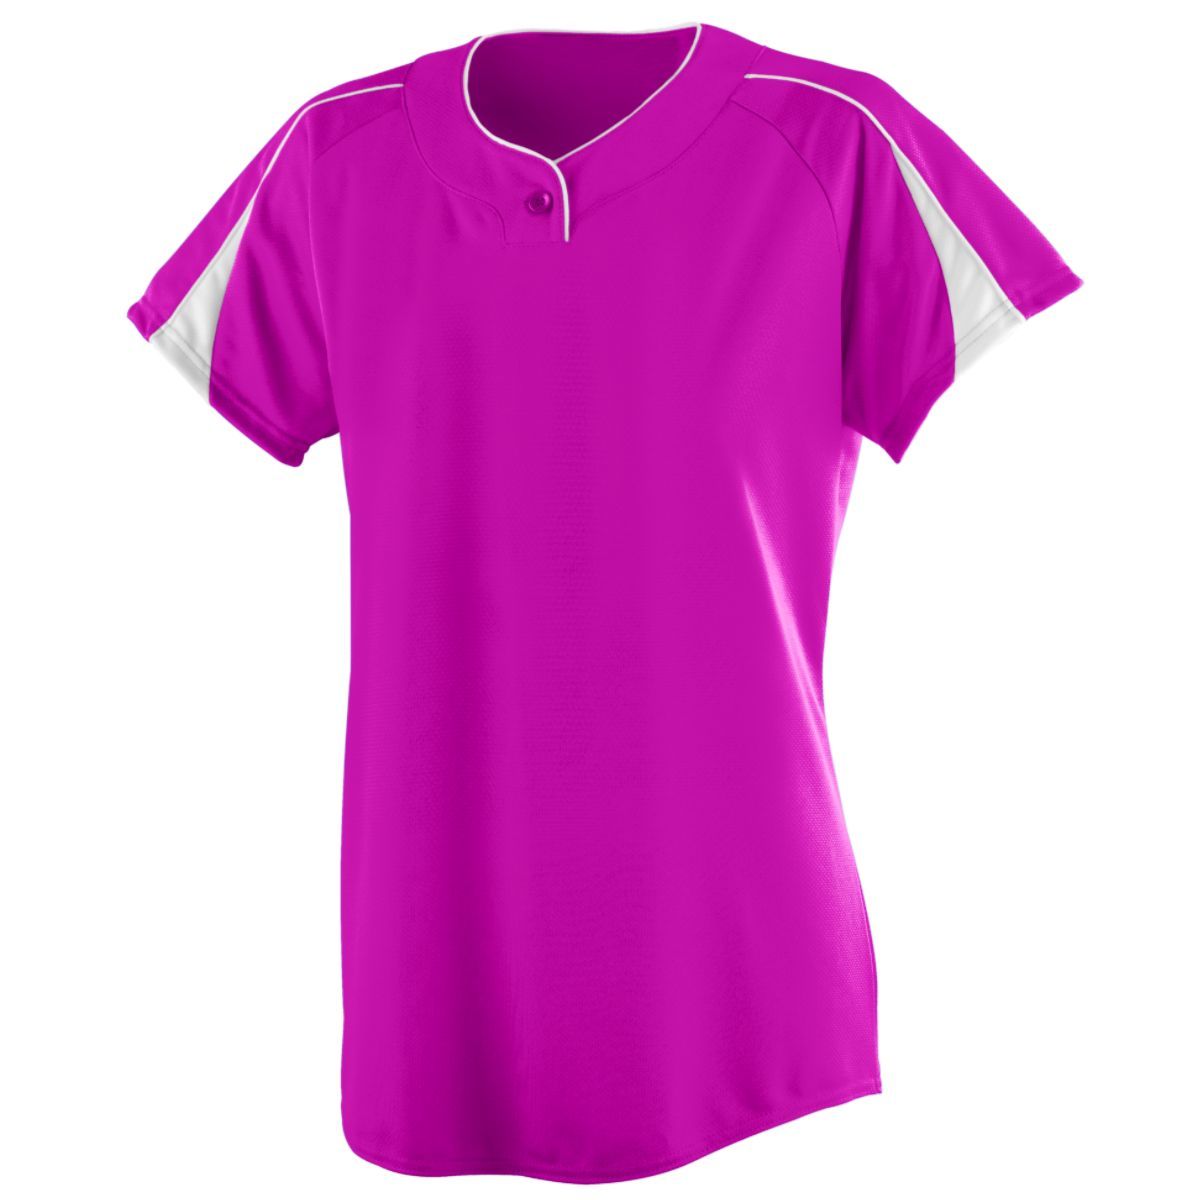 Augusta Sportswear Ladies Diamond Jersey in Power Pink/White  -Part of the Ladies, Ladies-Jersey, Augusta-Products, Softball, Shirts product lines at KanaleyCreations.com